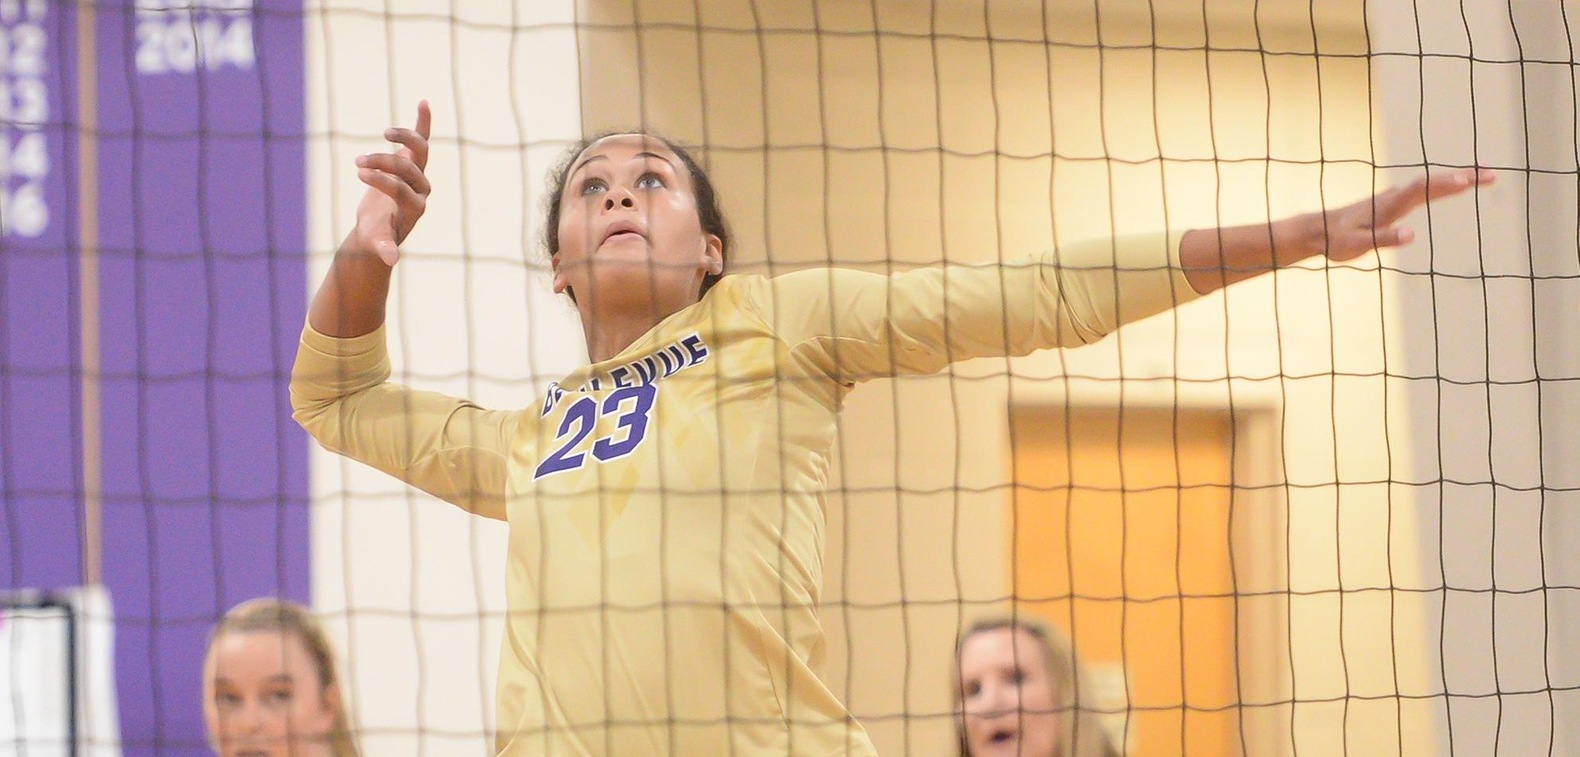 Eve Fountain hit .321 and led the Bruins with 14 kills in their season-opening win over Montana Tech